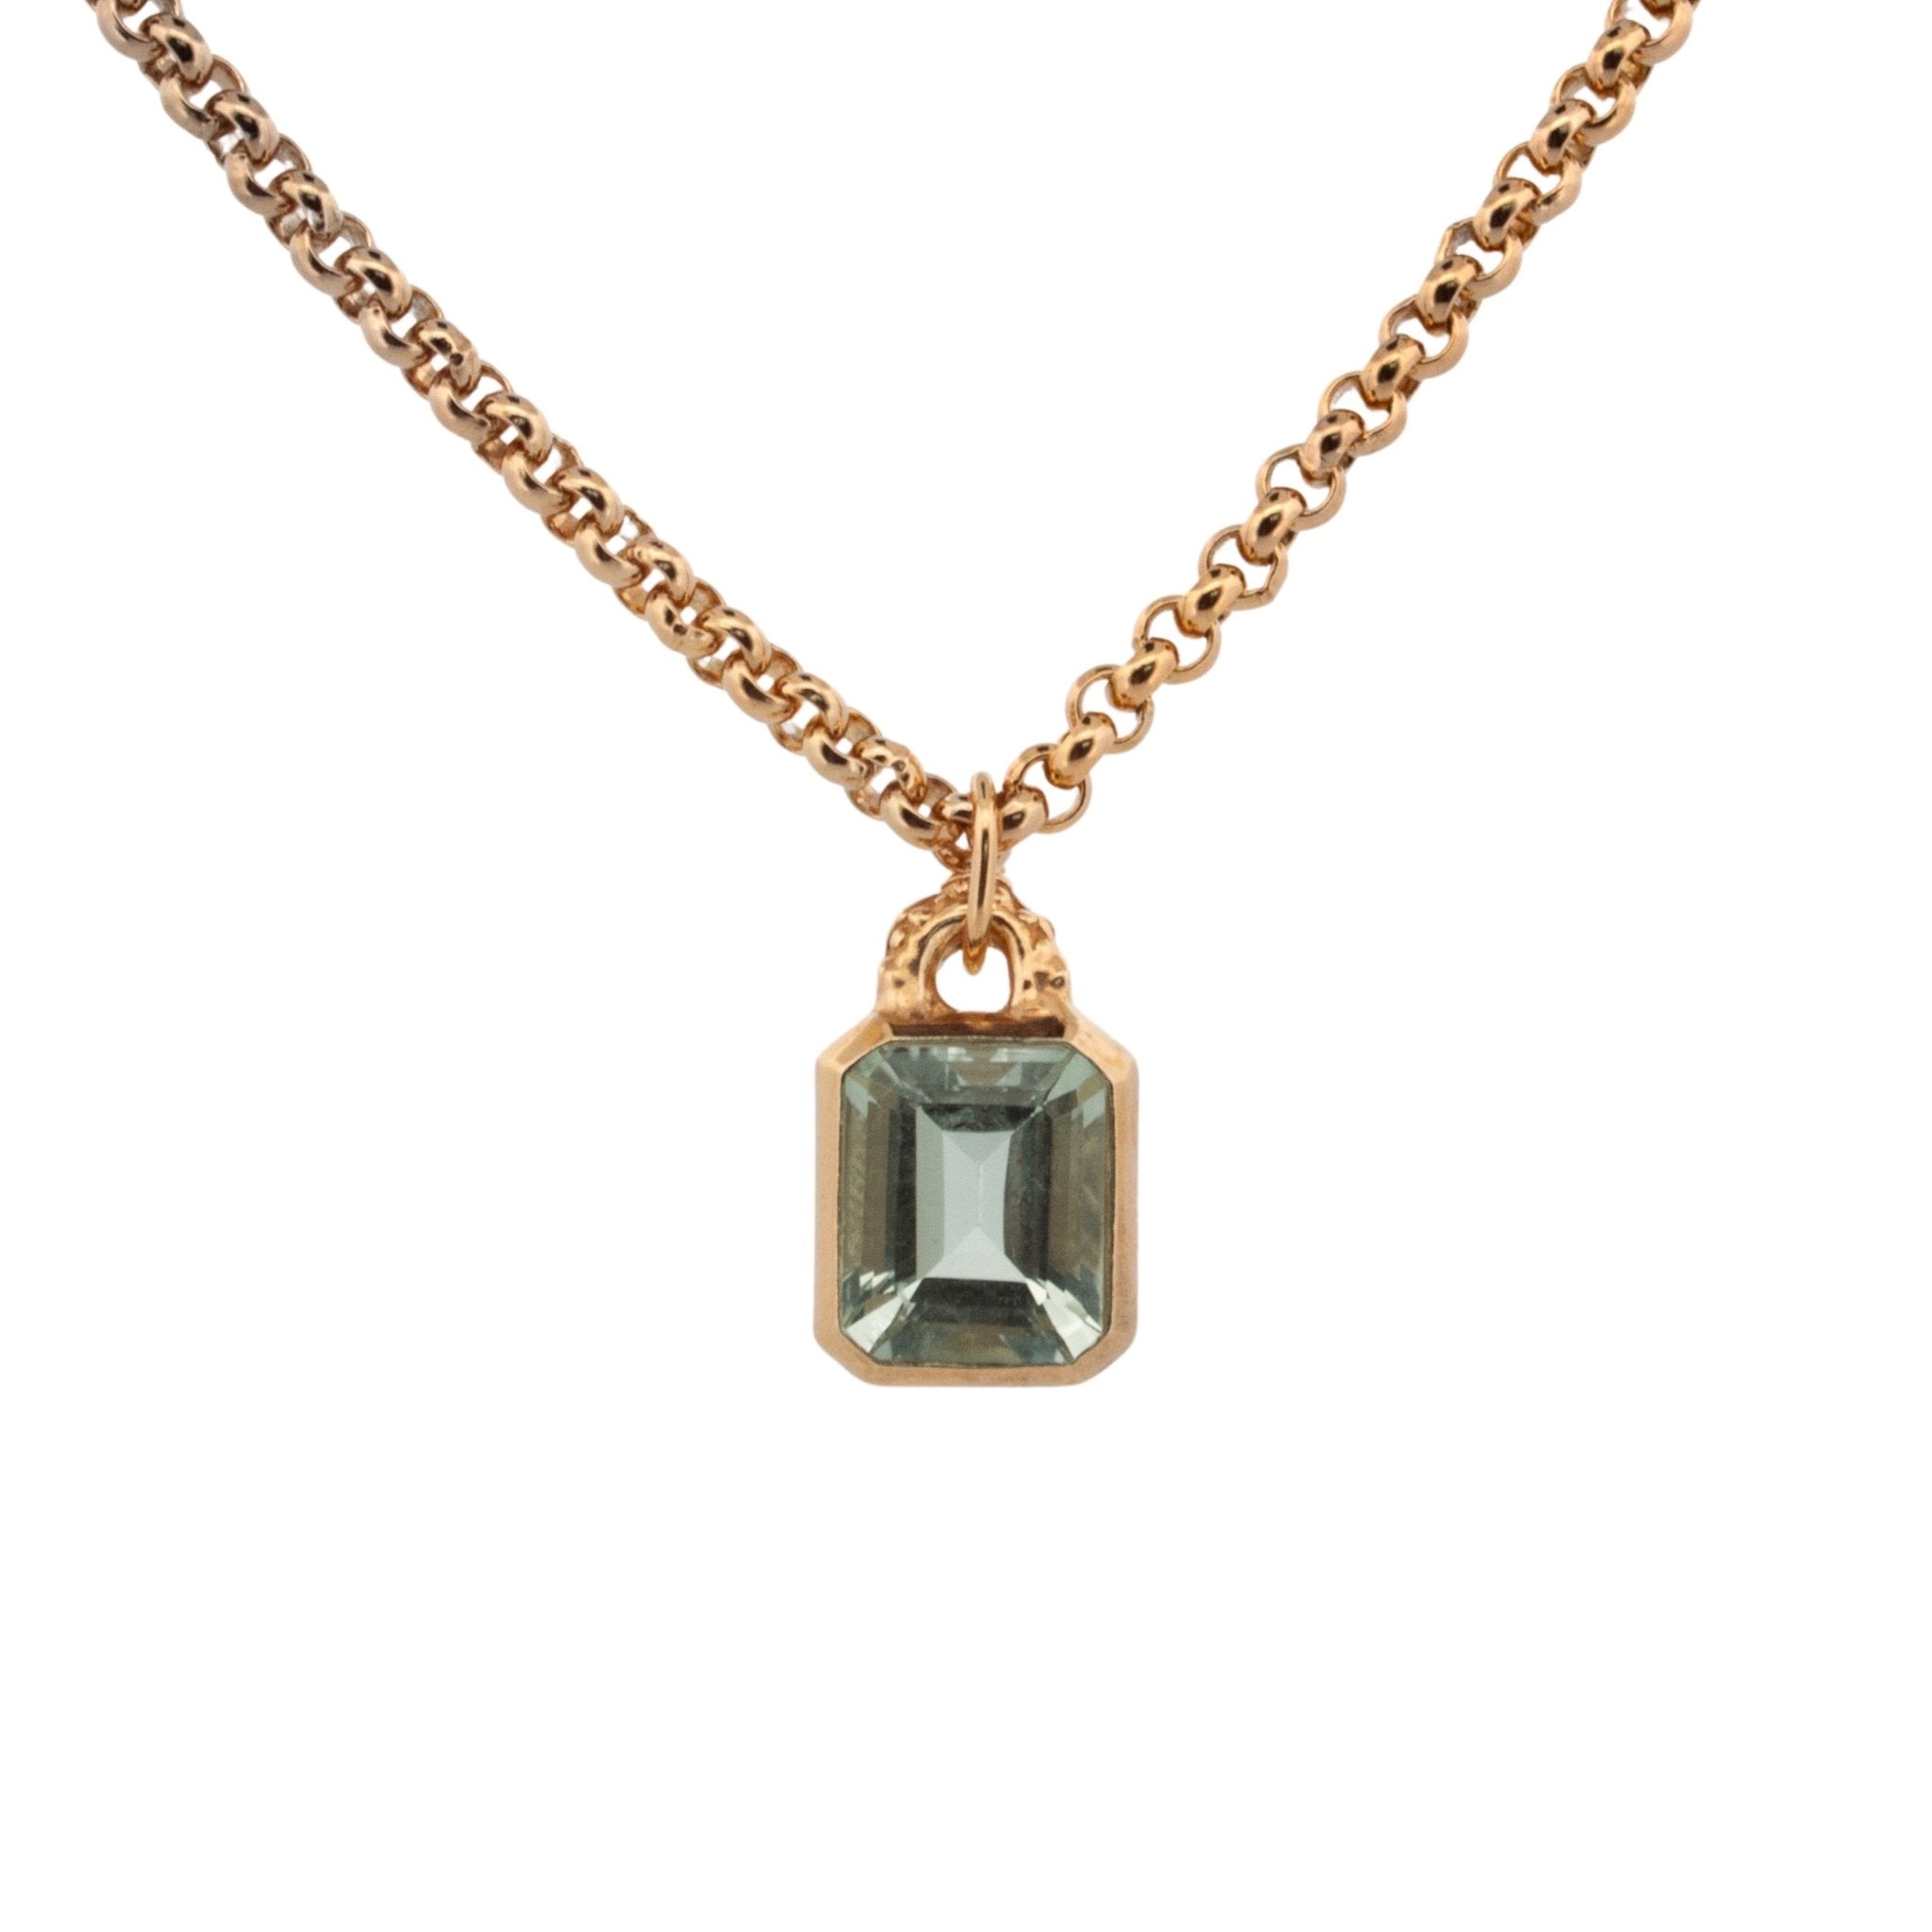 Maxi Gold Giselle Necklace - Dainty London